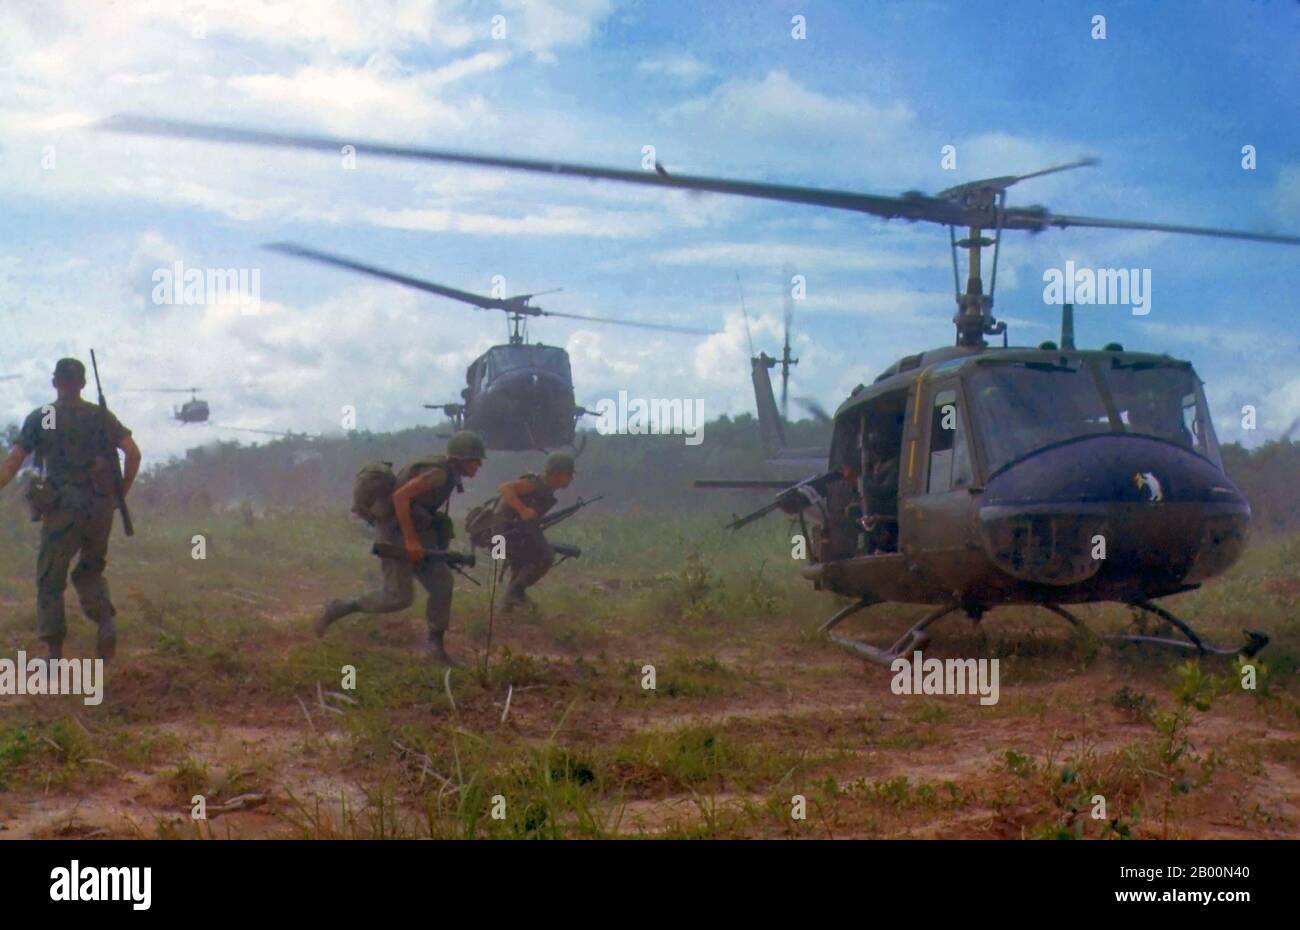 Vietnam: Huey UH-1D Helicopters played an integral part in the U.S military's land and air operations. Here UH-1Ds airlift members of the 2nd Battalion, 14th Infantry Regiment from a Rubber Plantation area to a new staging area during a search and destroy mission conducted northeast of Cu Chi, South Vietnam, 1966. Stock Photo